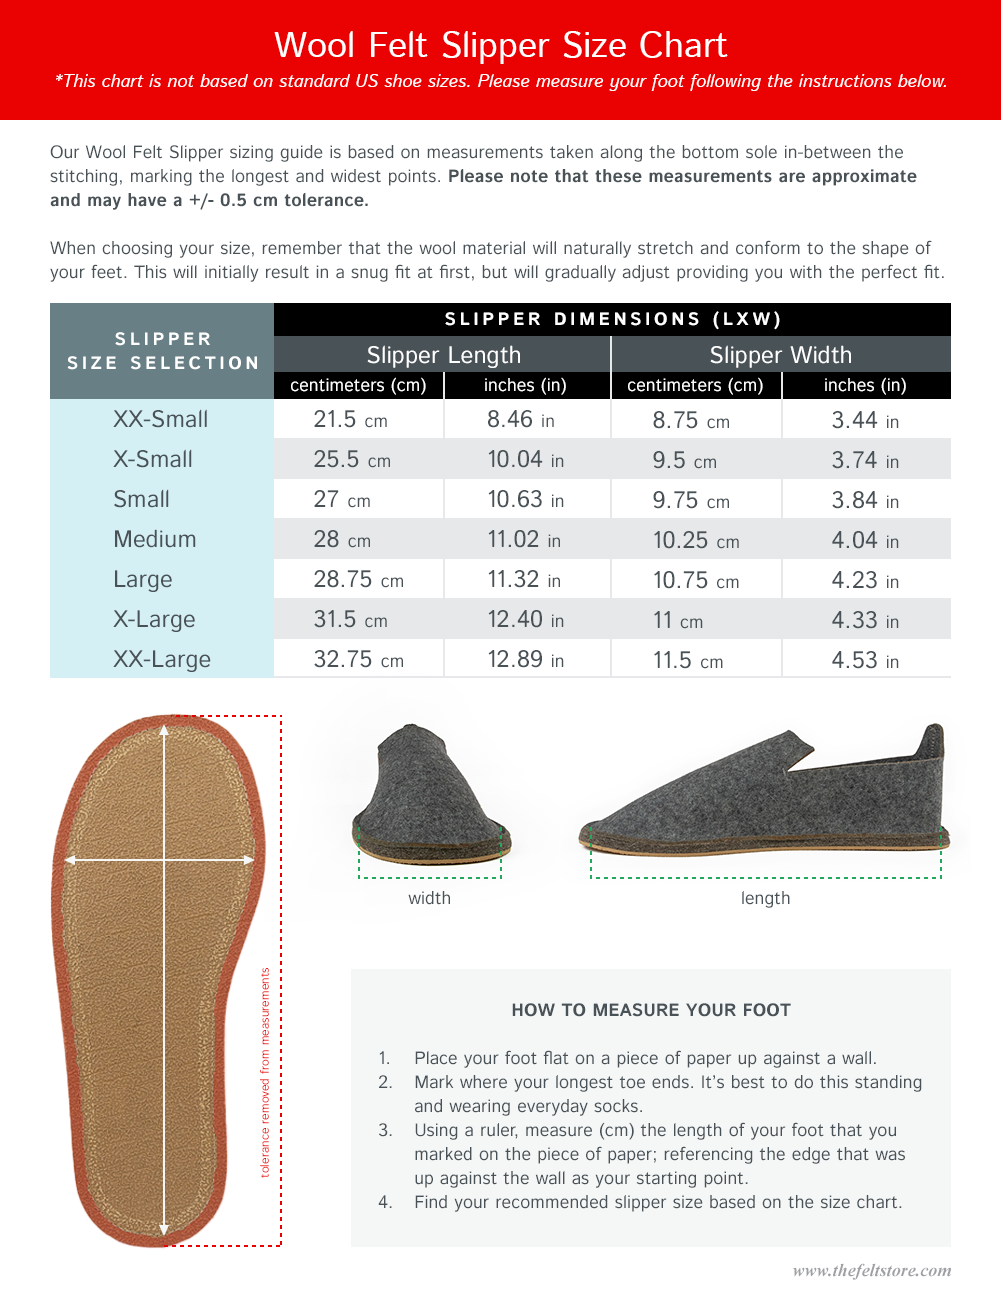 100% Wool Felt Slipper size chart — Find your perfect fit with The Felt Store's comprehensive slipper size guide — Includes instructions on how to measure your foot